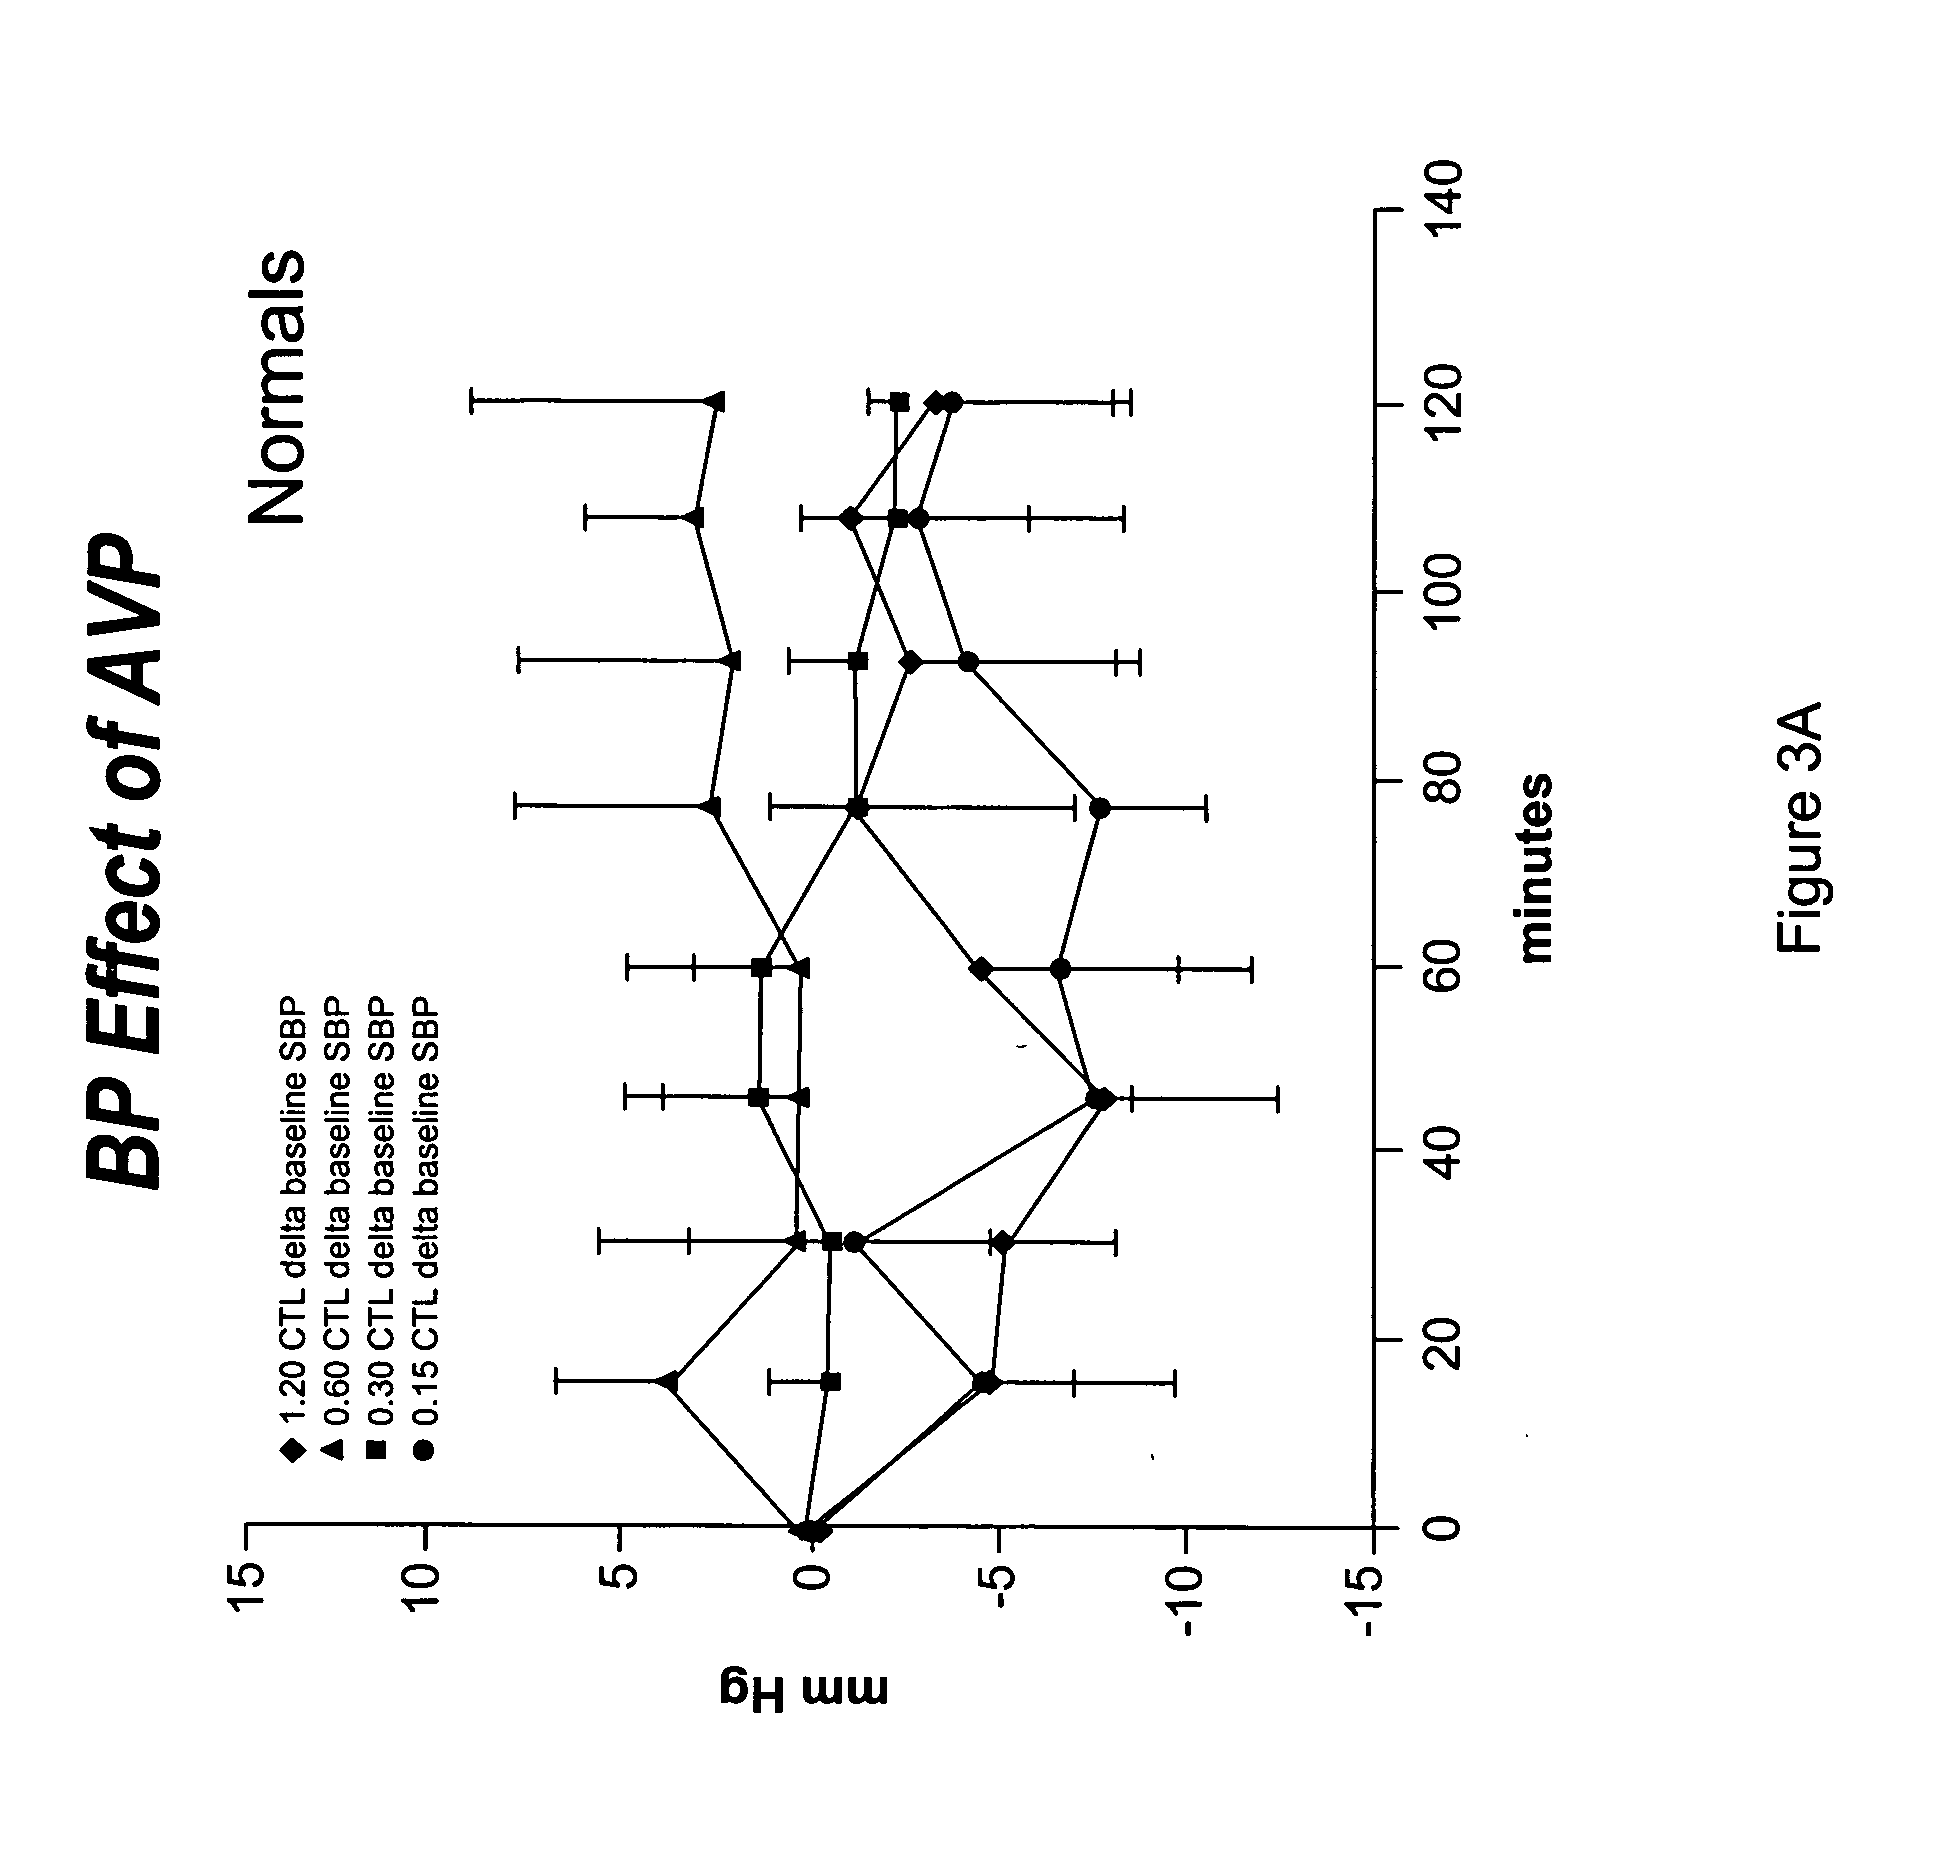 Method for stabilizing blood pressure in hemodialysis subjects